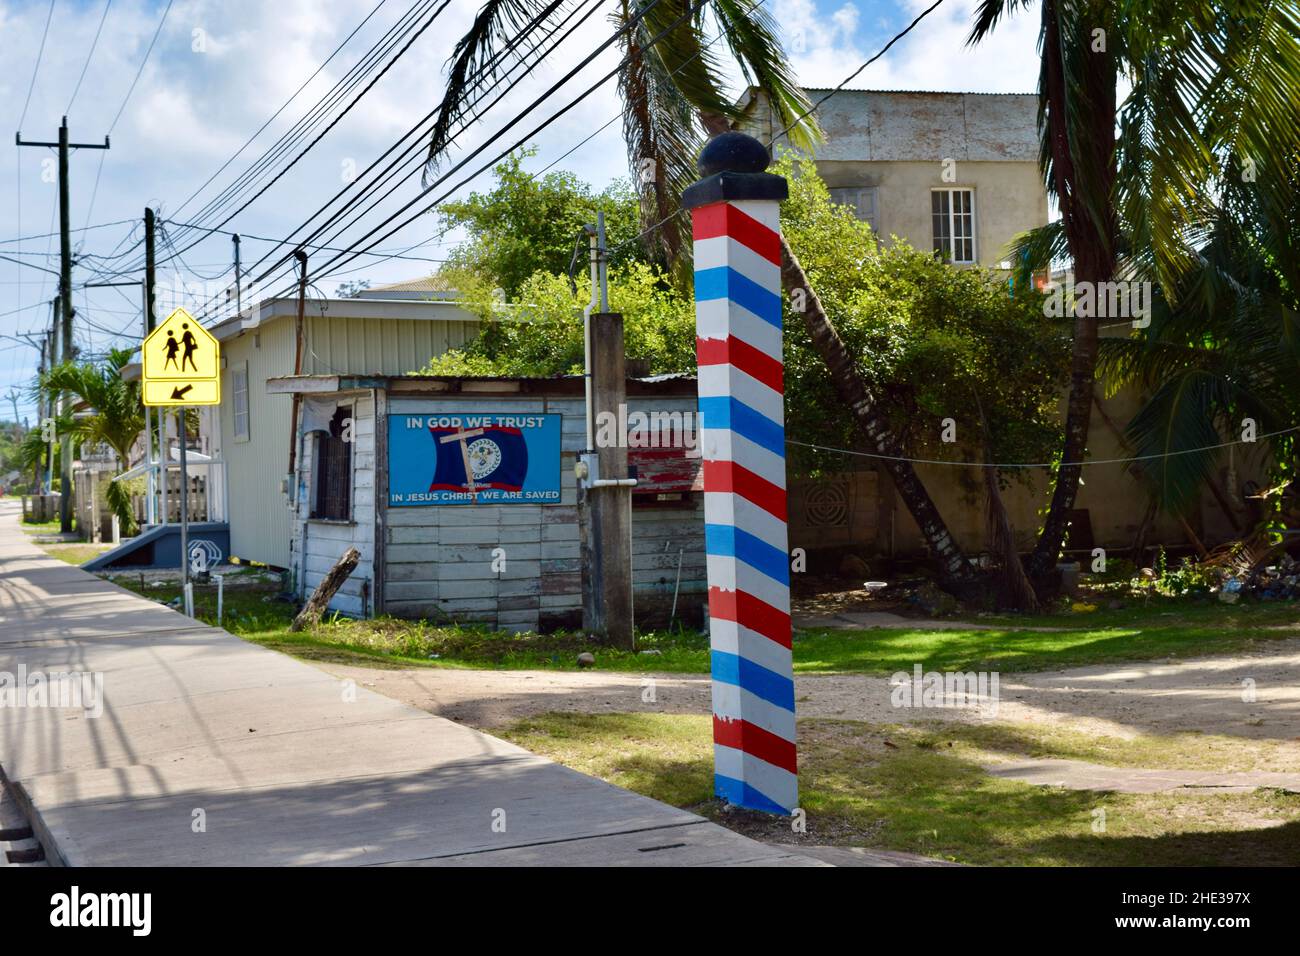 A typical neighborhood street in Belize City, Belize with a barber shop insignia, the Belizean flag, and a crosswalk sign. Stock Photo